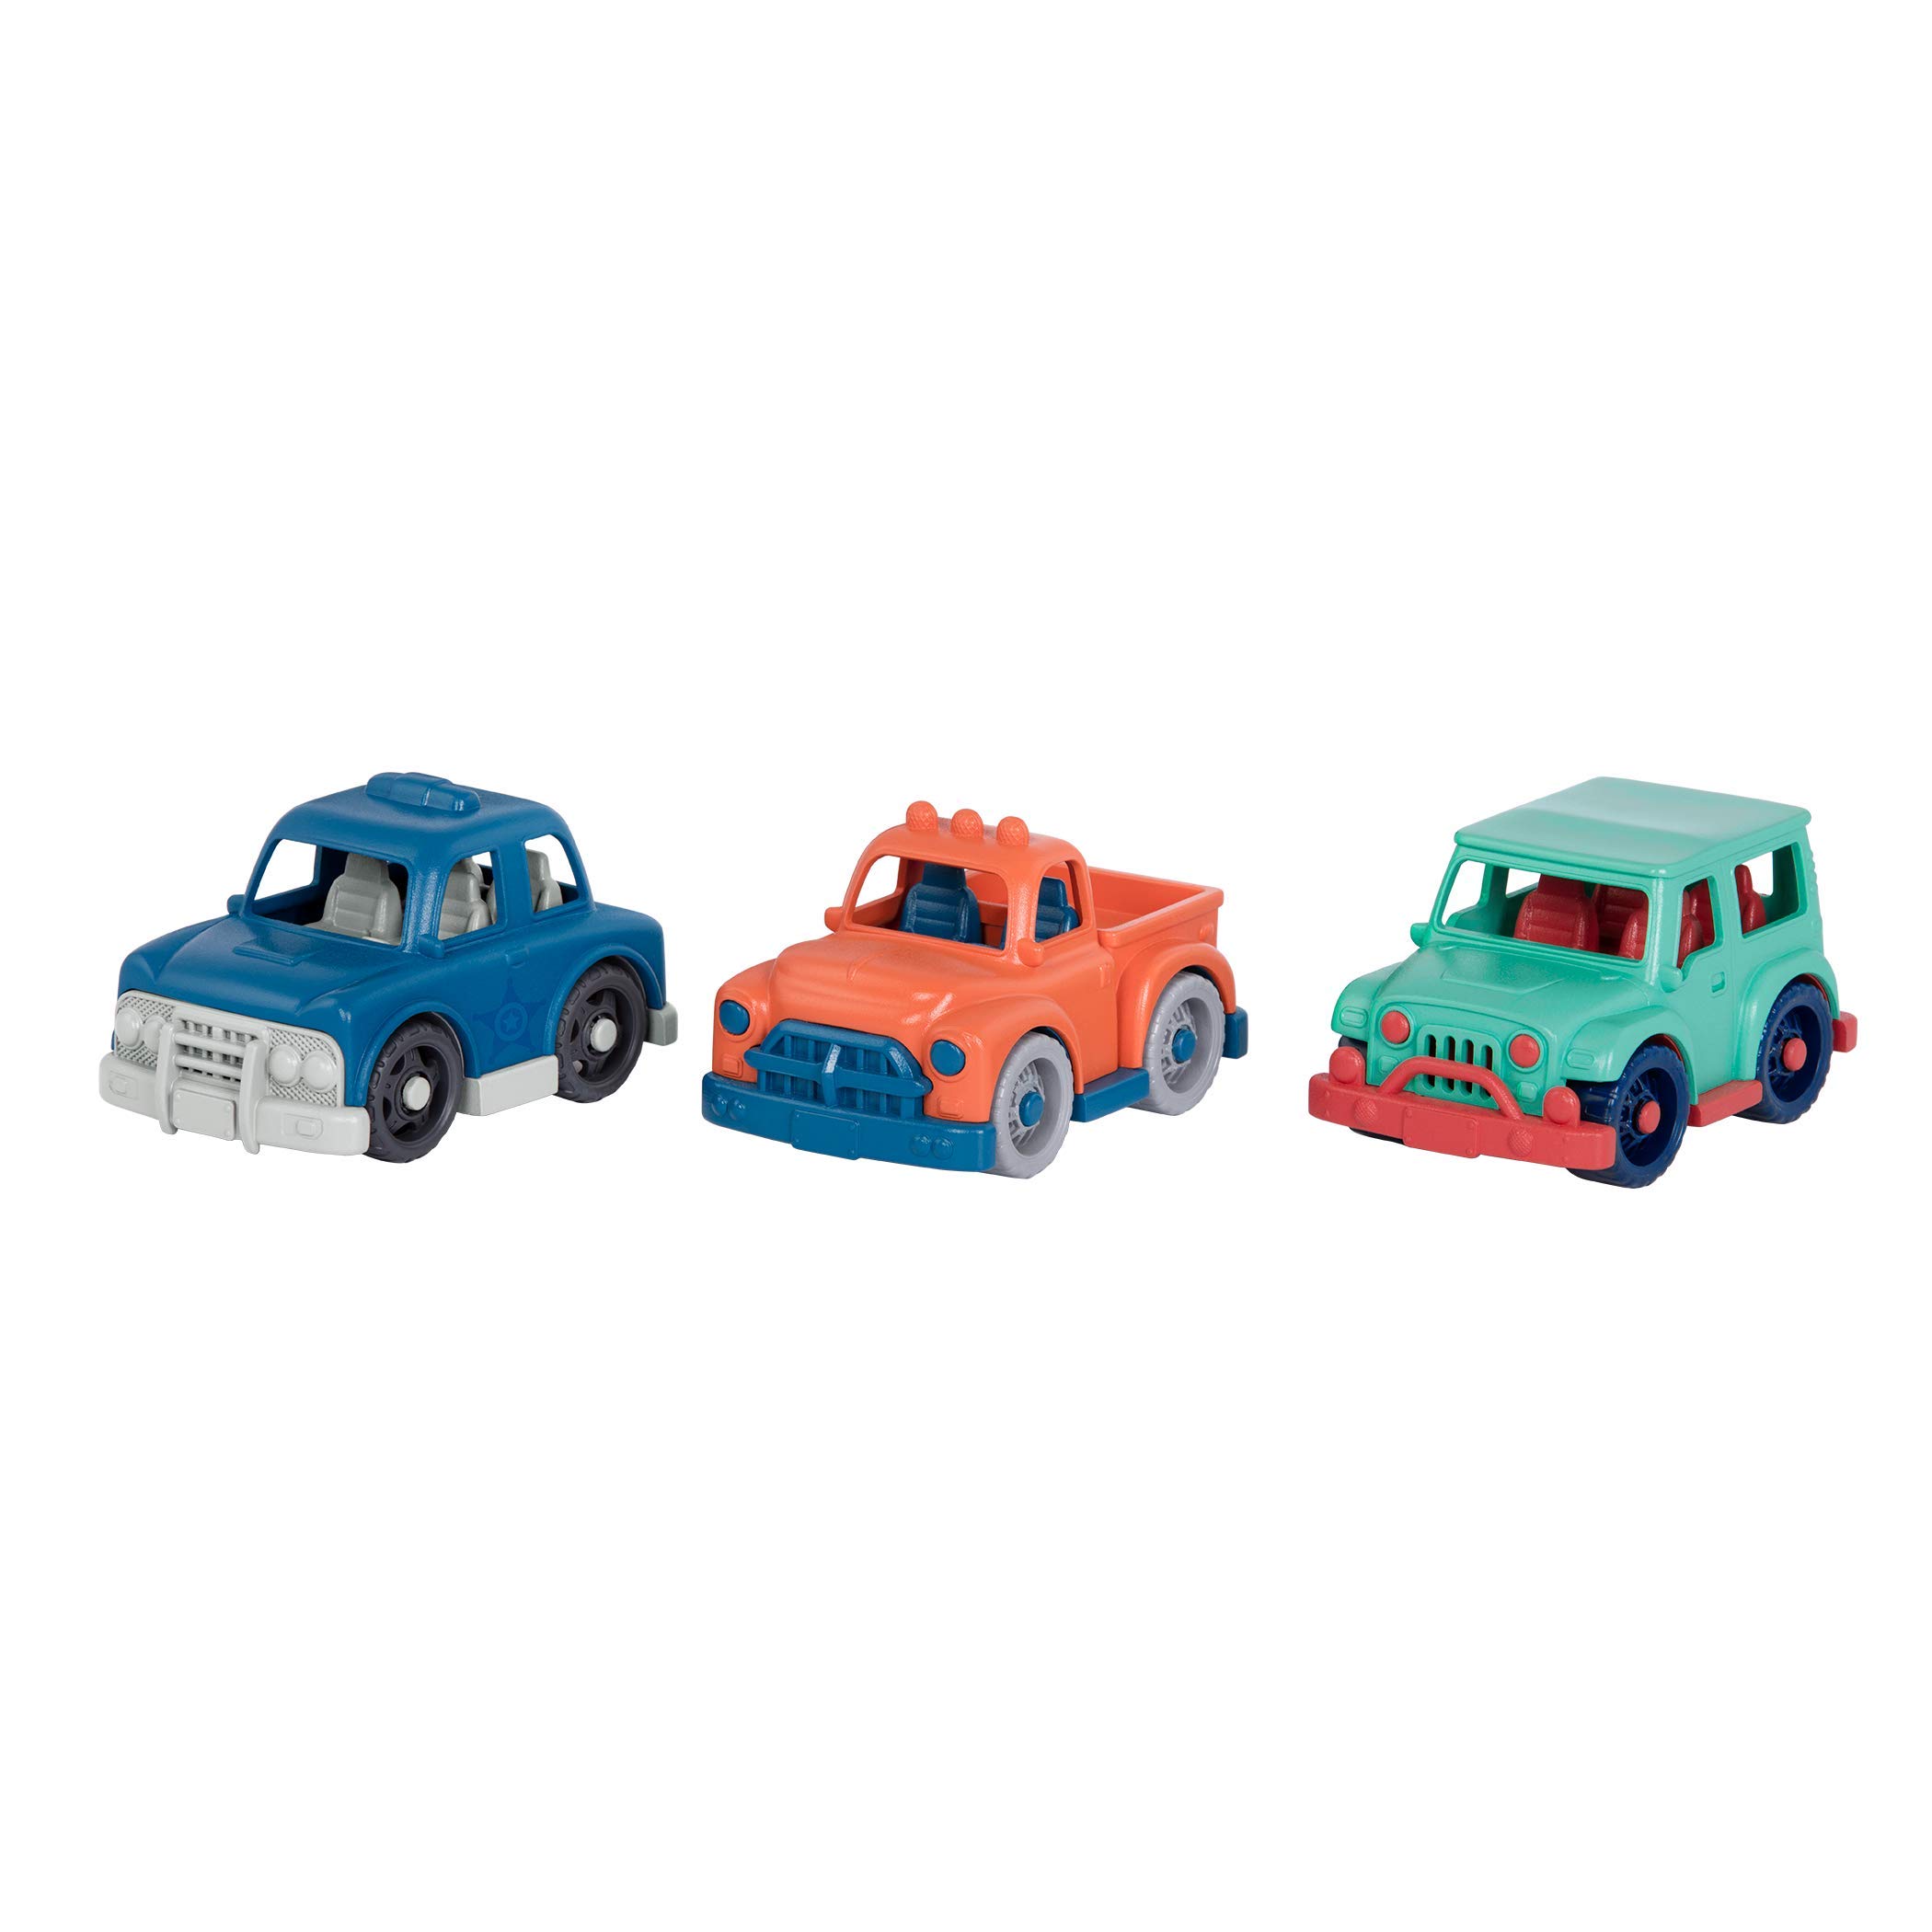 Wonder Wheels by Battat – Toy Cars – Set of 6 Mini Vehicles – Racer, Pick-Up Truck, Police Car, Taxi, Retro Car, 4x4 – Cars for Toddlers, Kids – 1 Year +, Multicolor (VE1037Z)